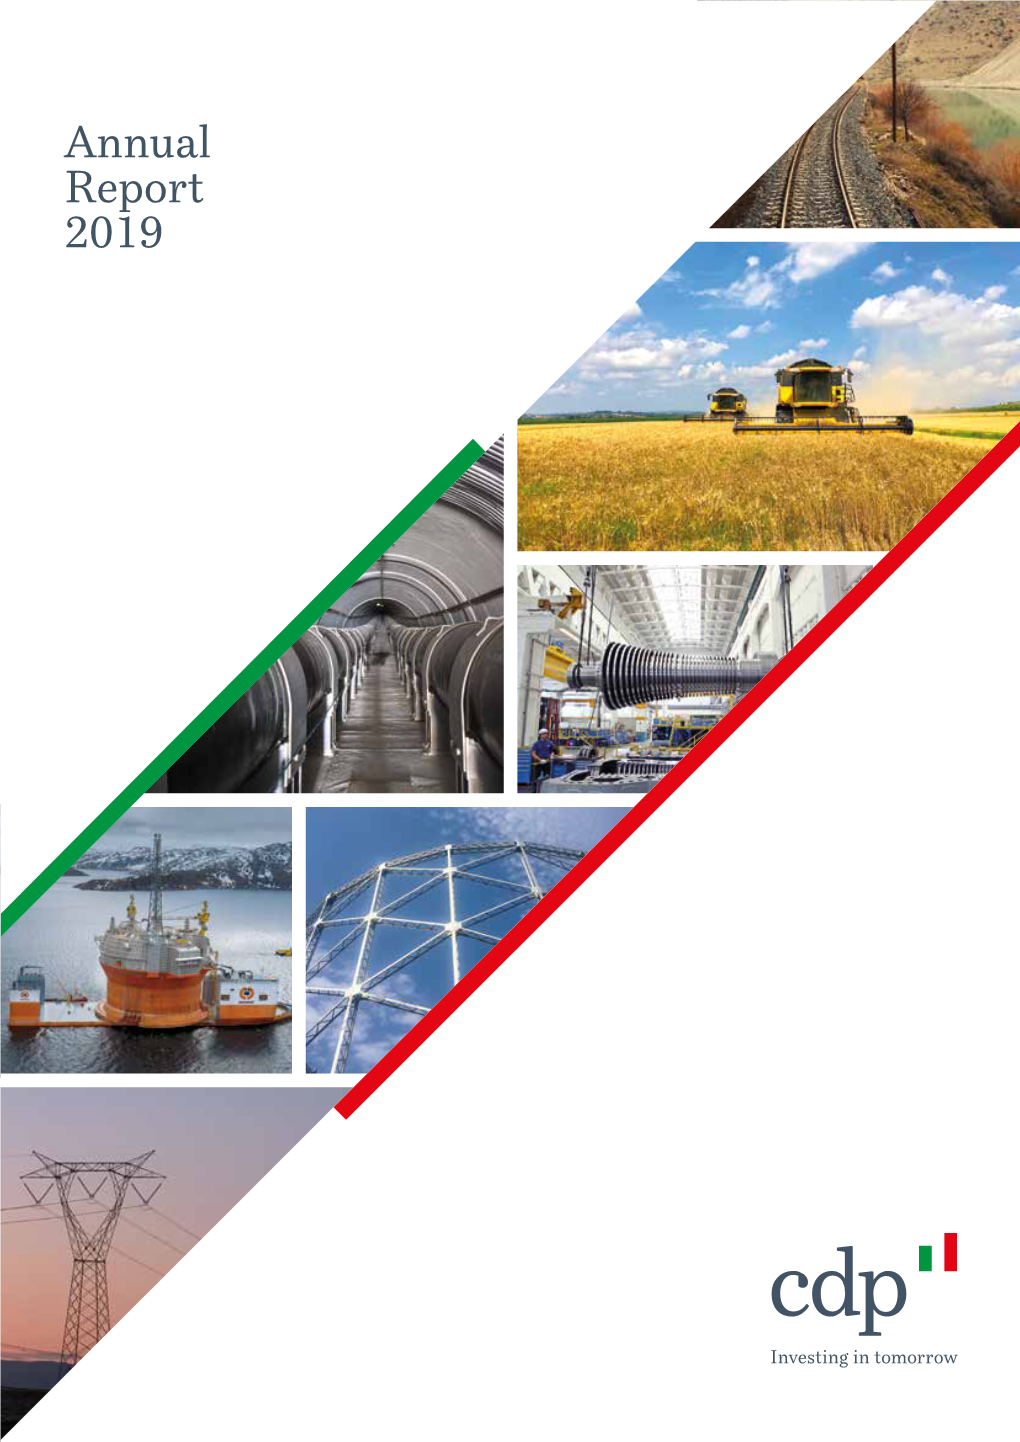 Annual Report 2019 OTHER EQUITY INVESTMENTS